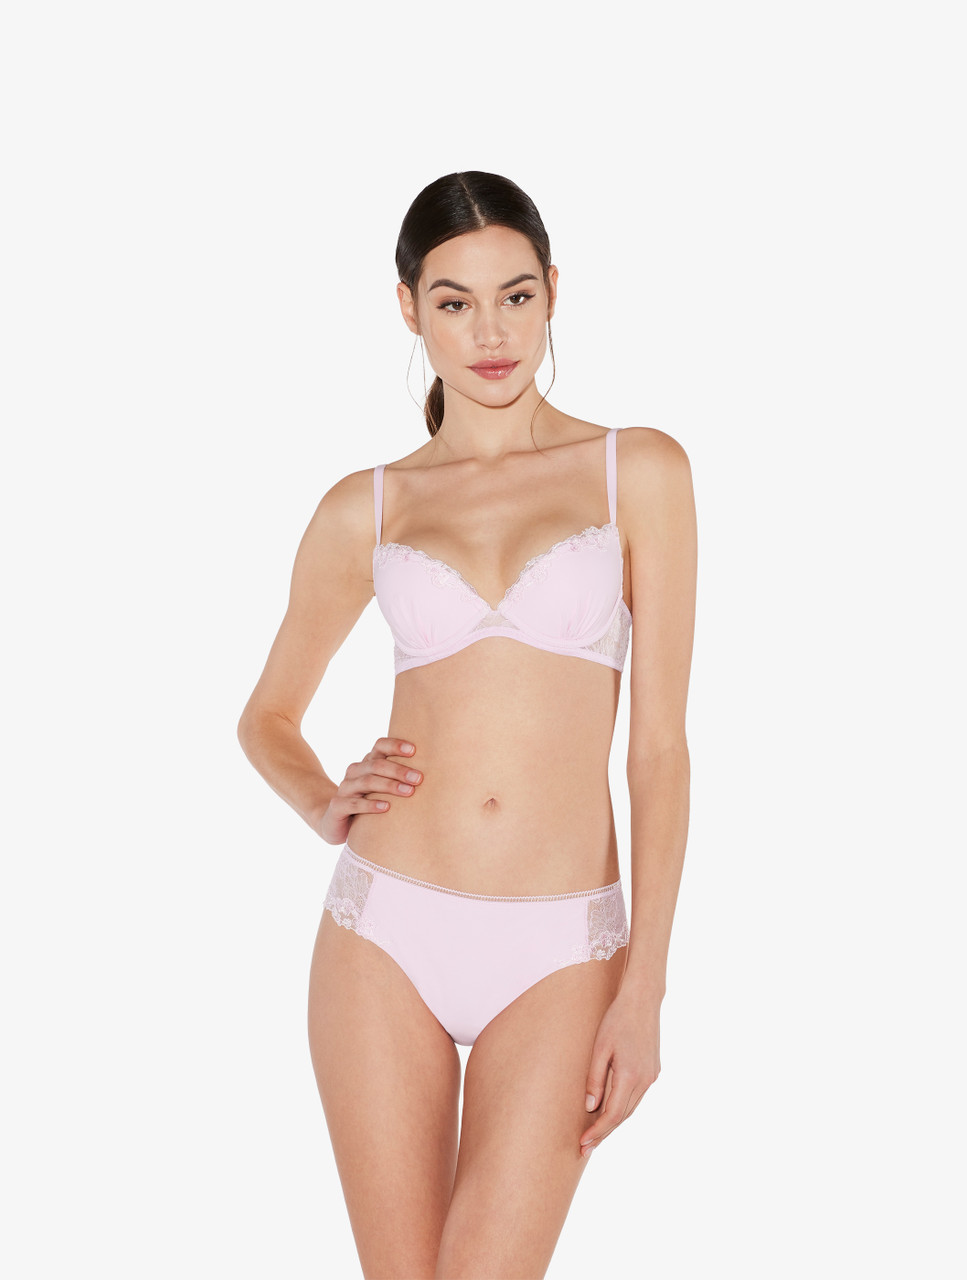 Push-up bra in pink with French Leavers lace